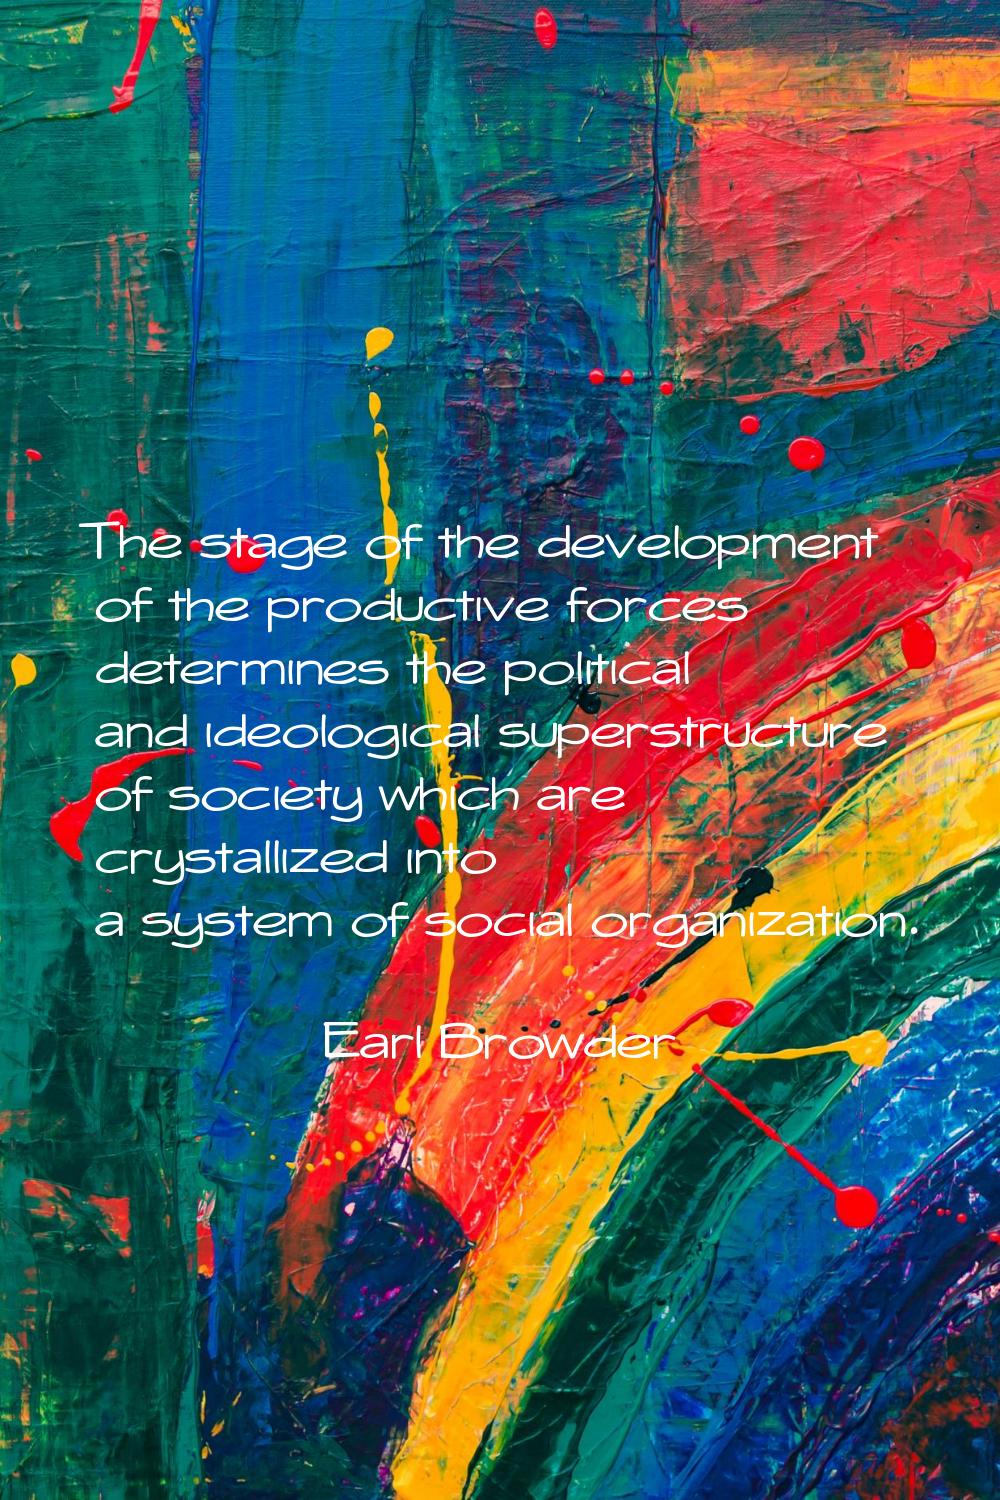 The stage of the development of the productive forces determines the political and ideological supe